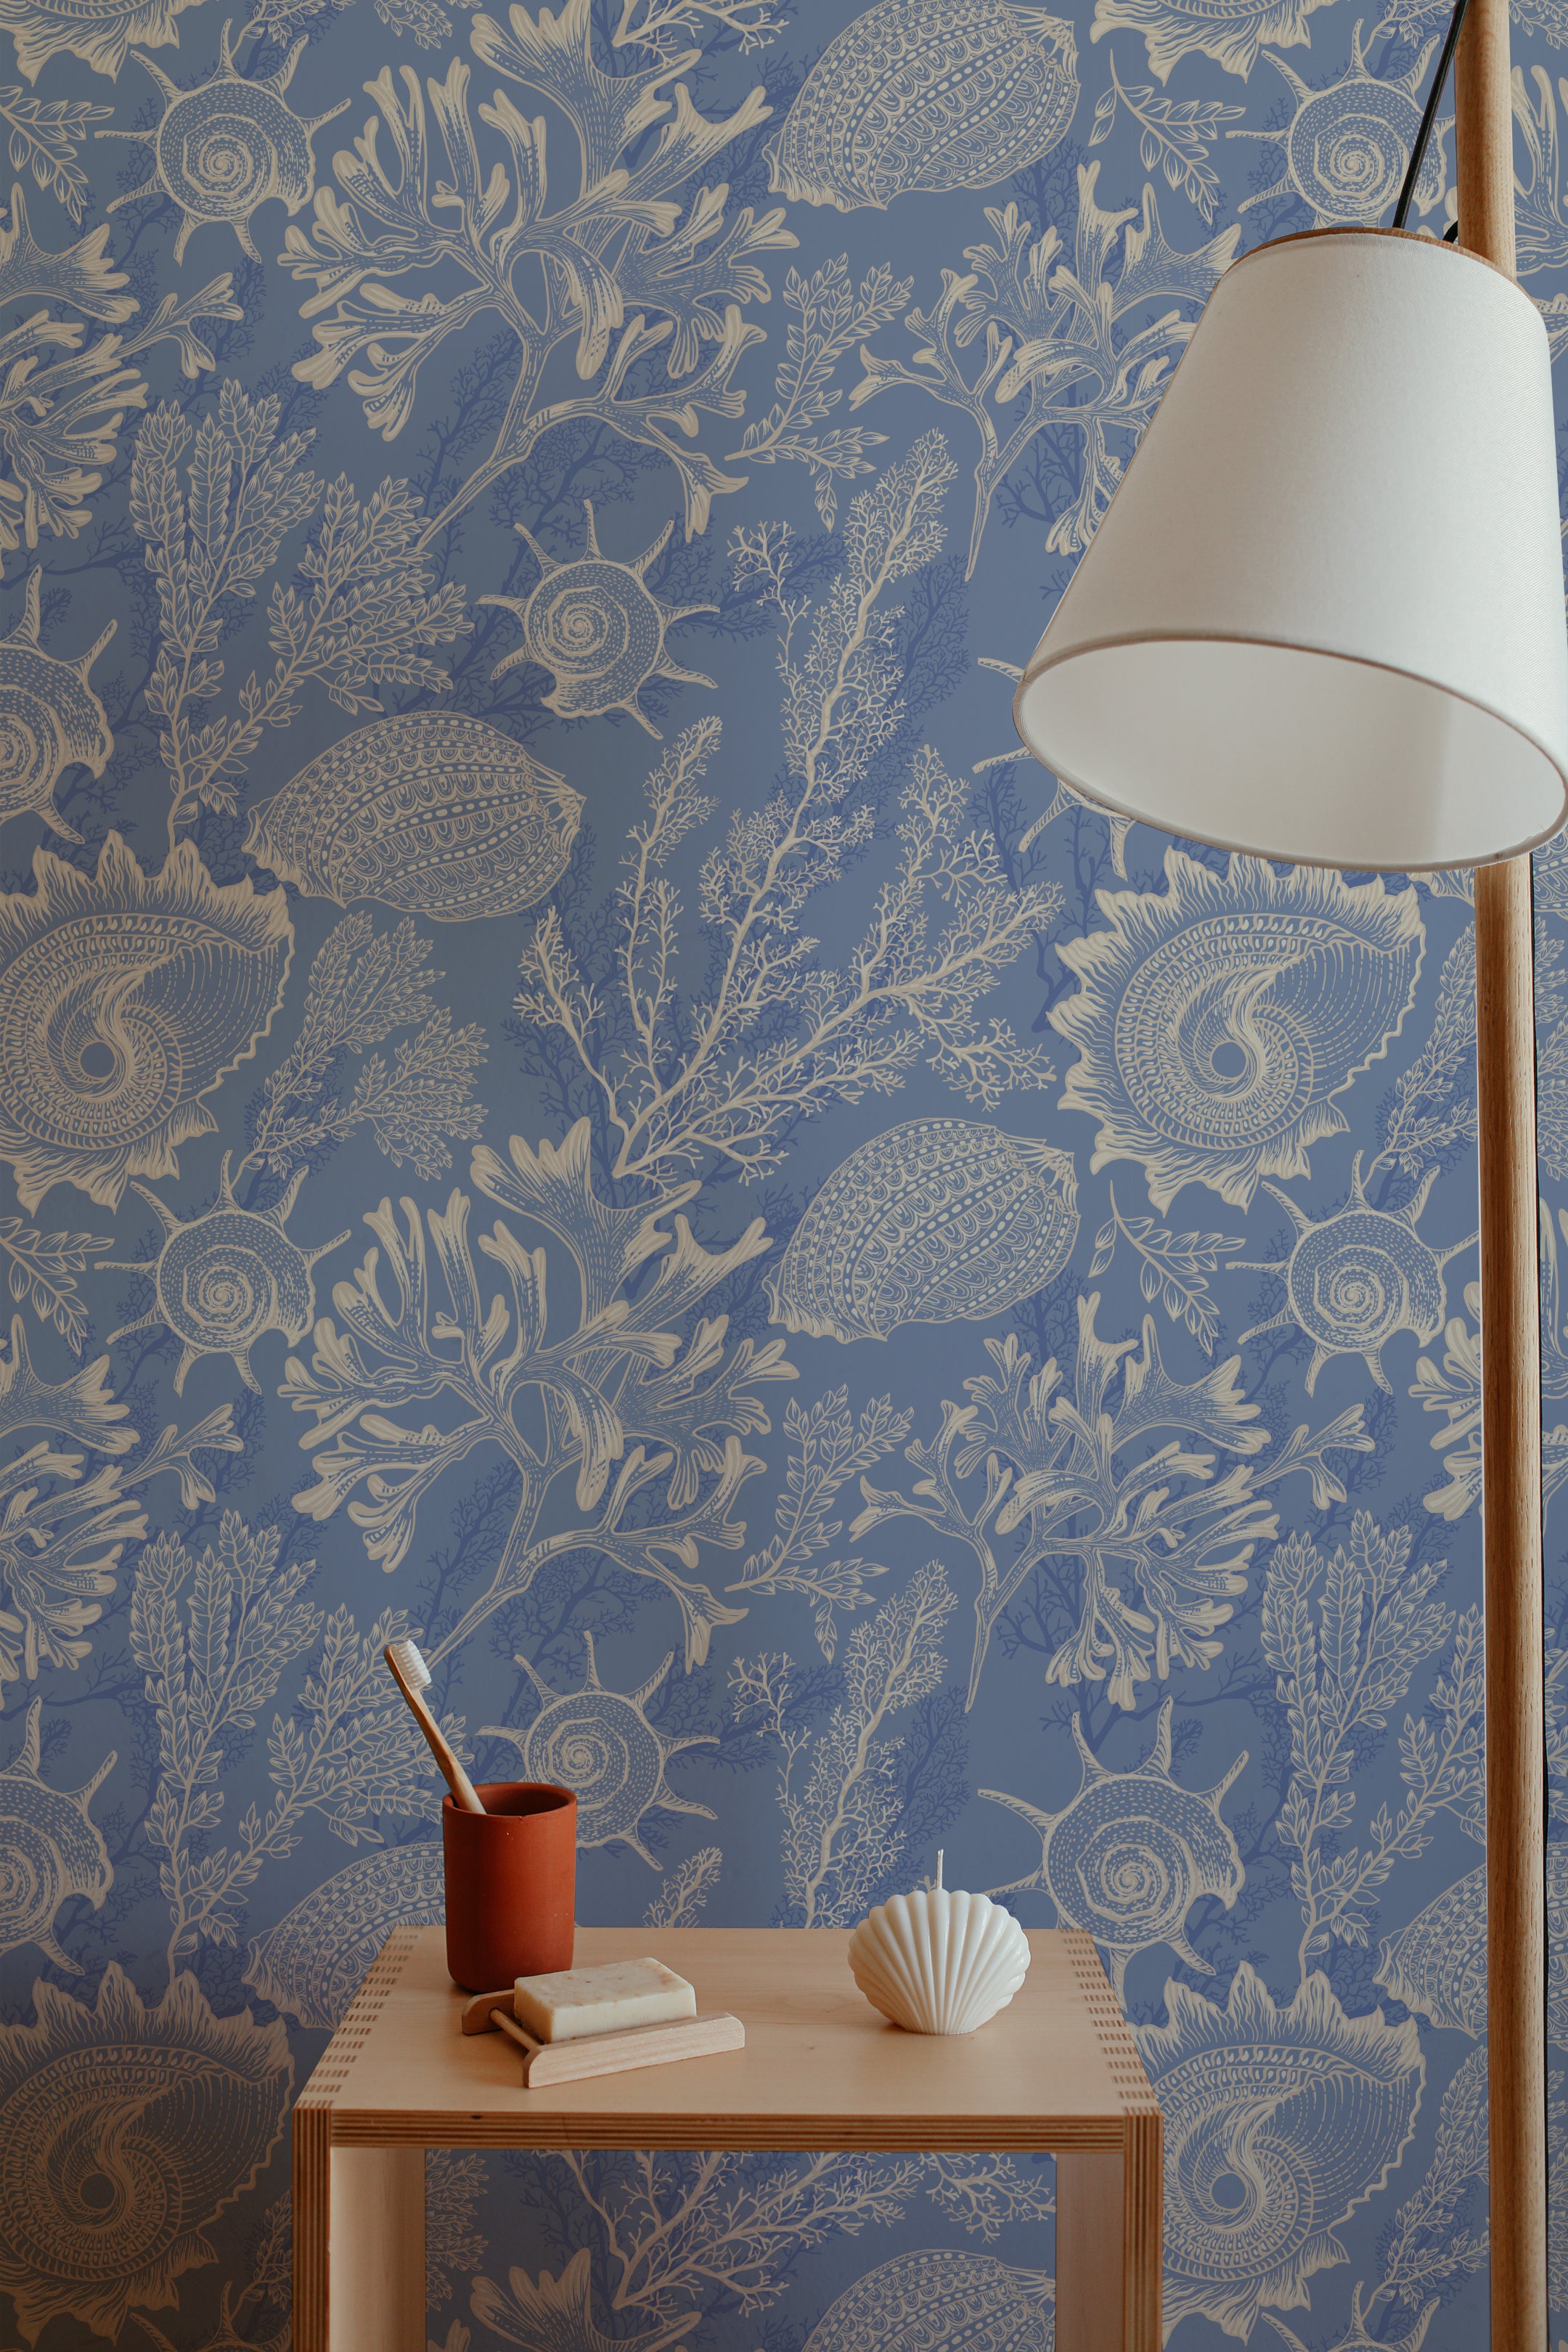 A minimalist interior setup featuring a wooden table with a terracotta cup holding a toothbrush, a bar of soap, and a seashell-shaped candle. A floor lamp with a white shade stands beside the table. The background features Coastal Treasures Wallpaper with intricate illustrations of seashells, coral, and sea plants in beige on a blue background, adding a coastal vibe to the space.